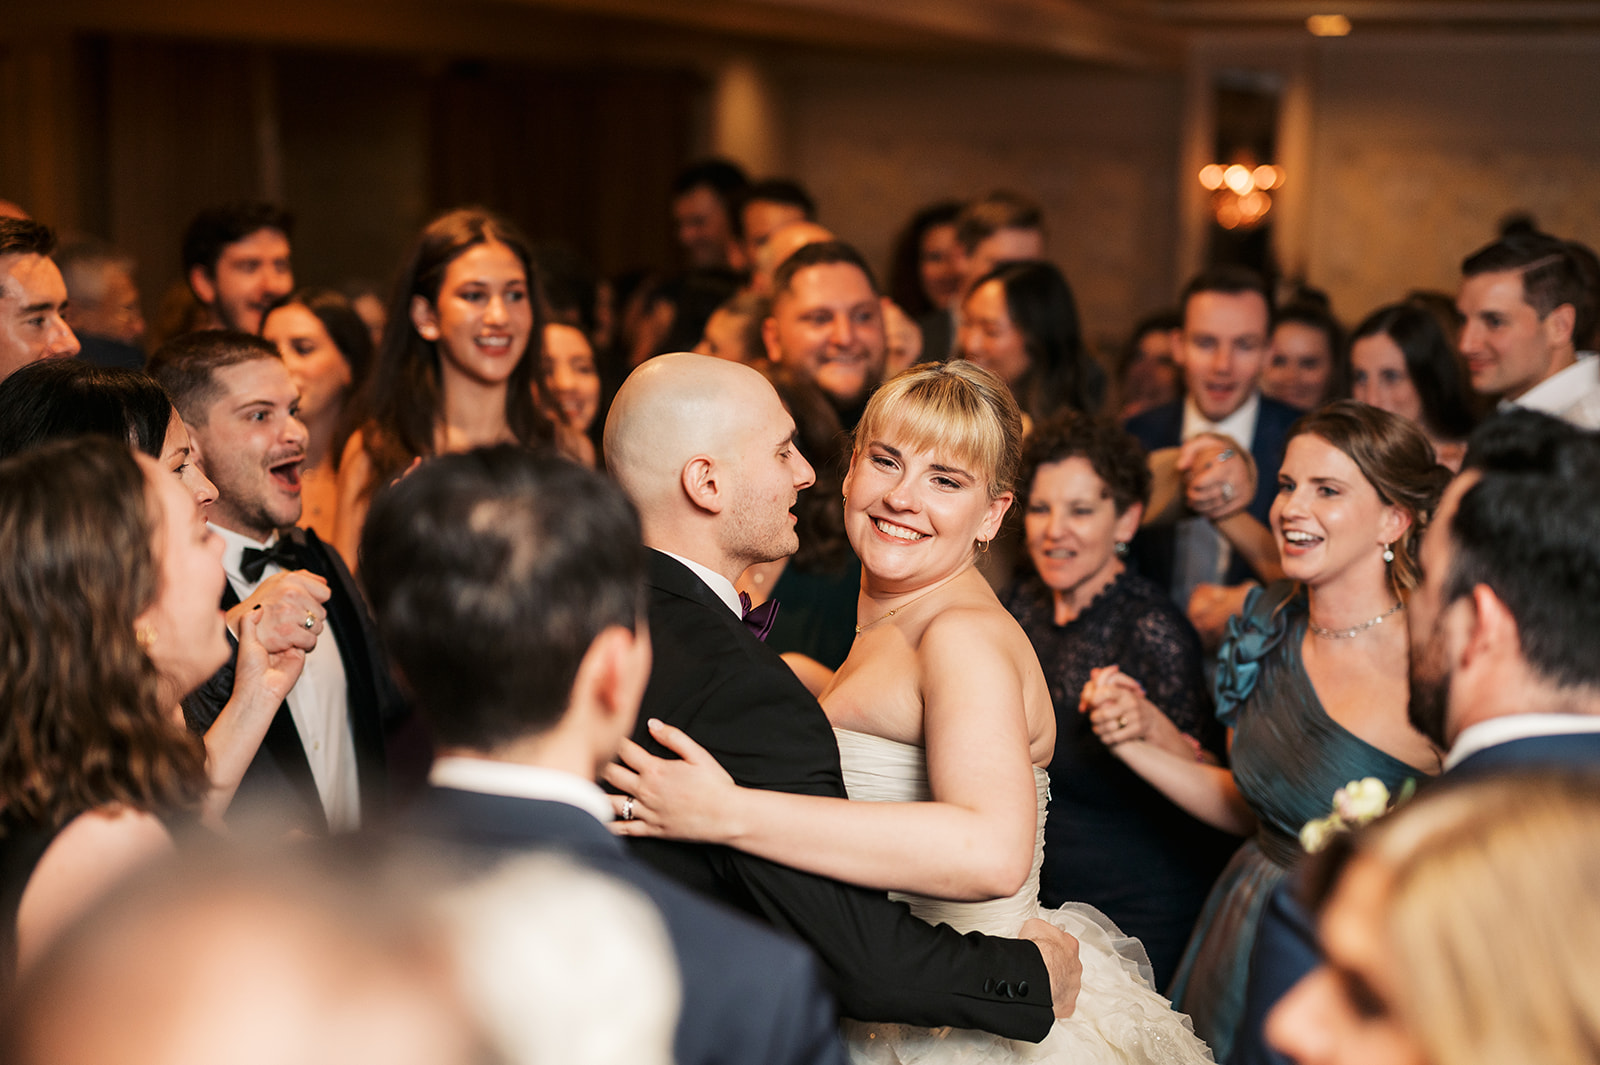 Newlyweds dance on the dance floor with all of their guests